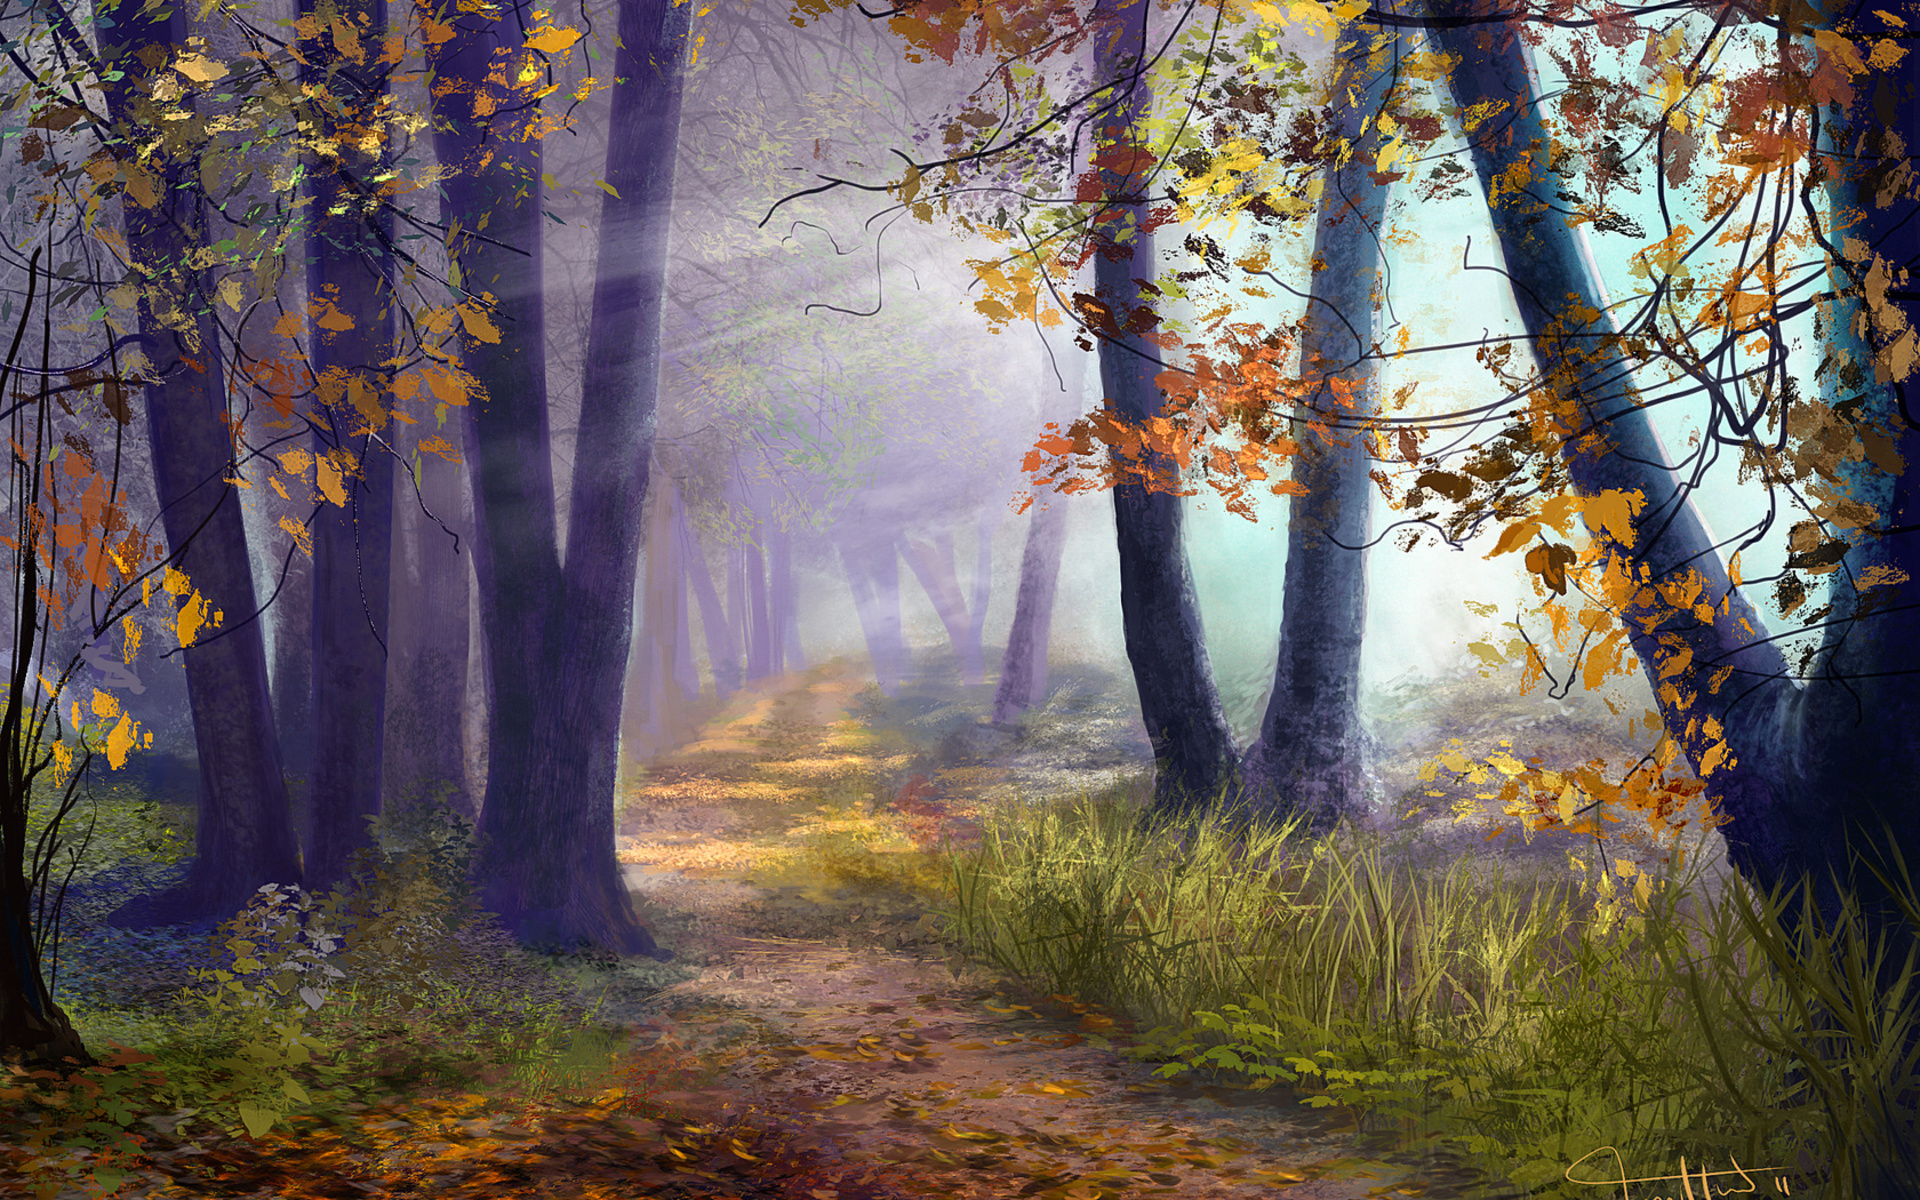 artistic, Art, Paintings, Path, Trail, Leaves, Nature, Landscapes, Trees, Forests, Autumn, Fall, Seasons, Sunlight, Sunbeam, Sun, Colors Wallpaper